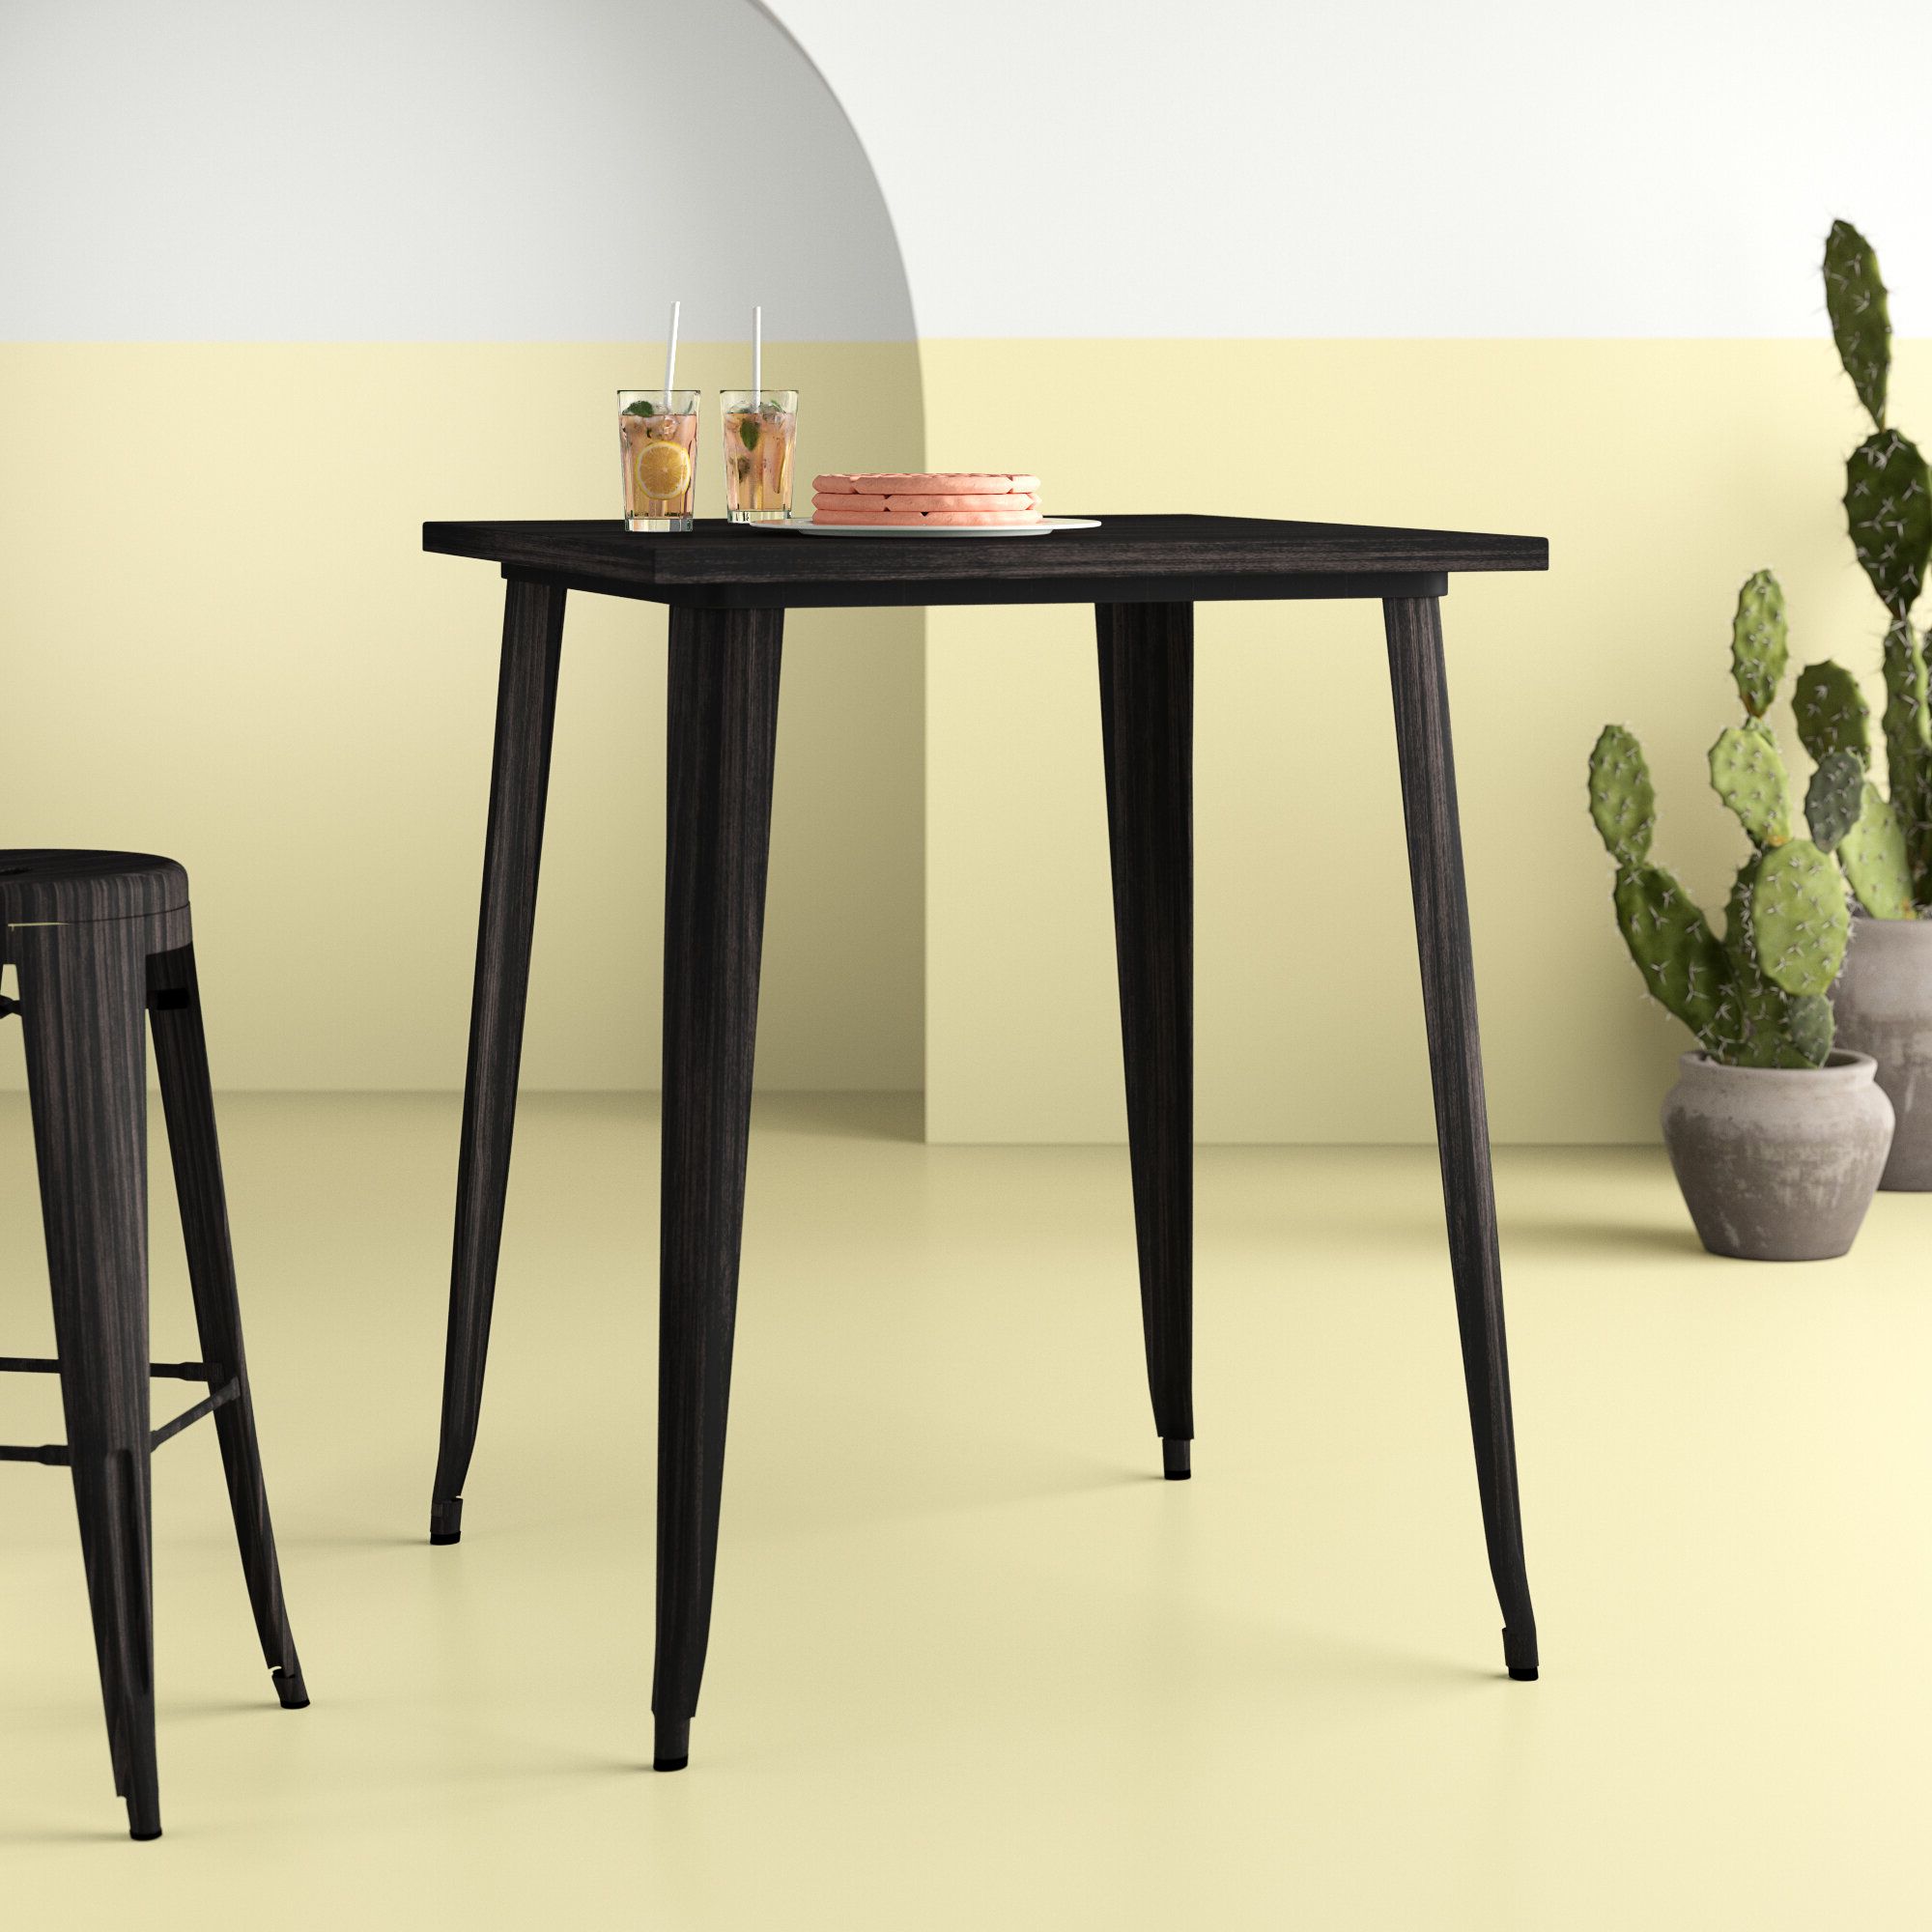 Outdoor Tall Bistro Table You'll Love In 2019 | Wayfair With Regard To Nadine Wood And Stainless Steel Buffets (View 17 of 20)